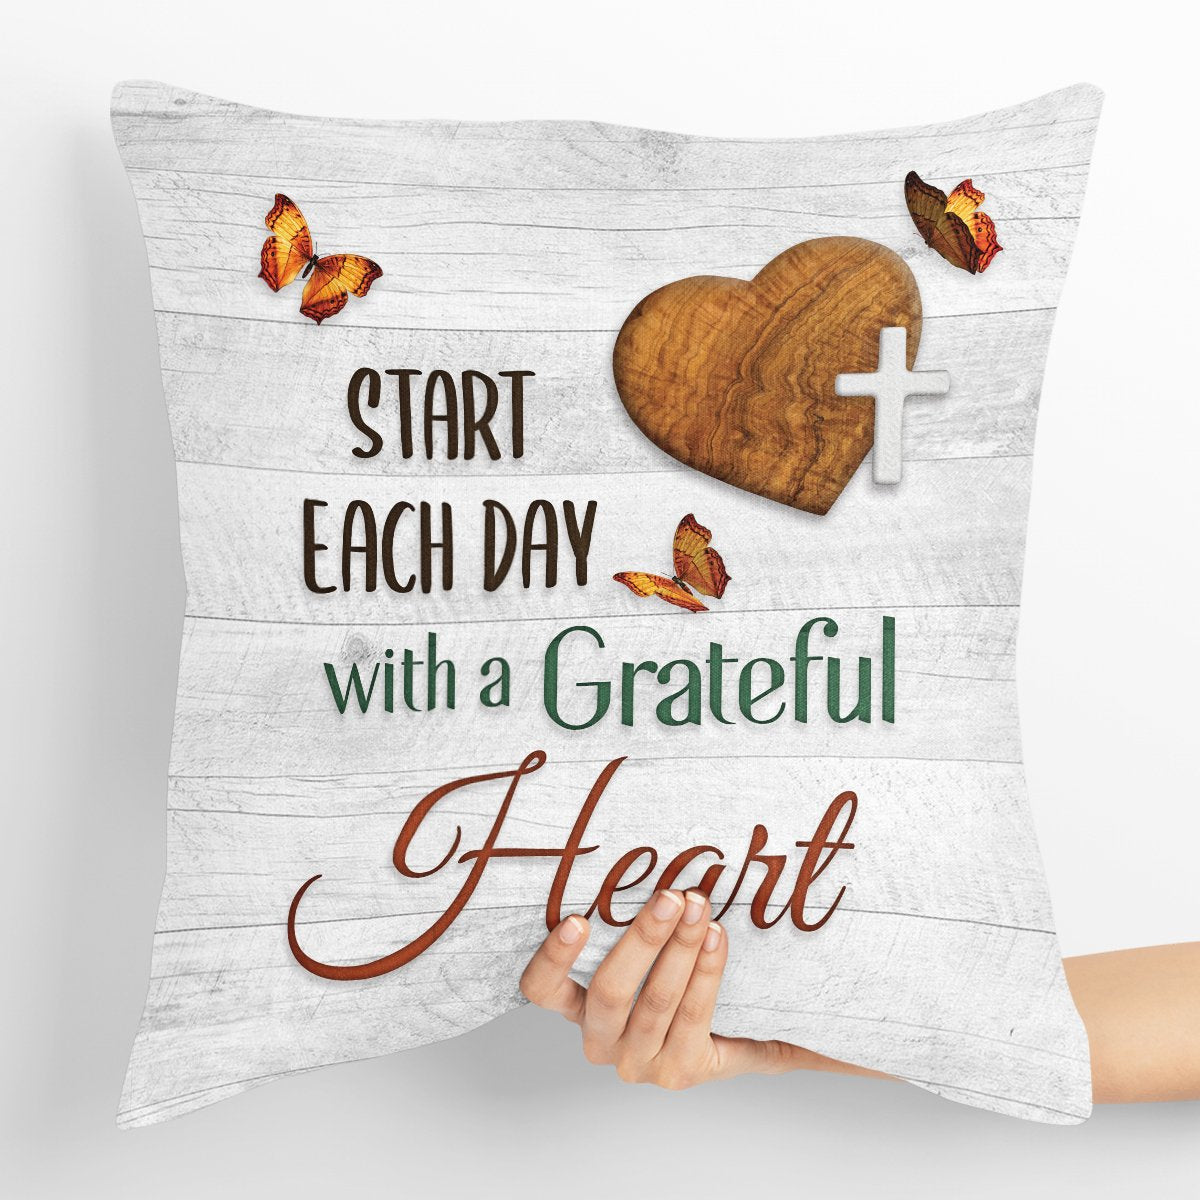 Start Each Day With A Grateful Heart - Meaningful Pillowcase NUHN40 - 4